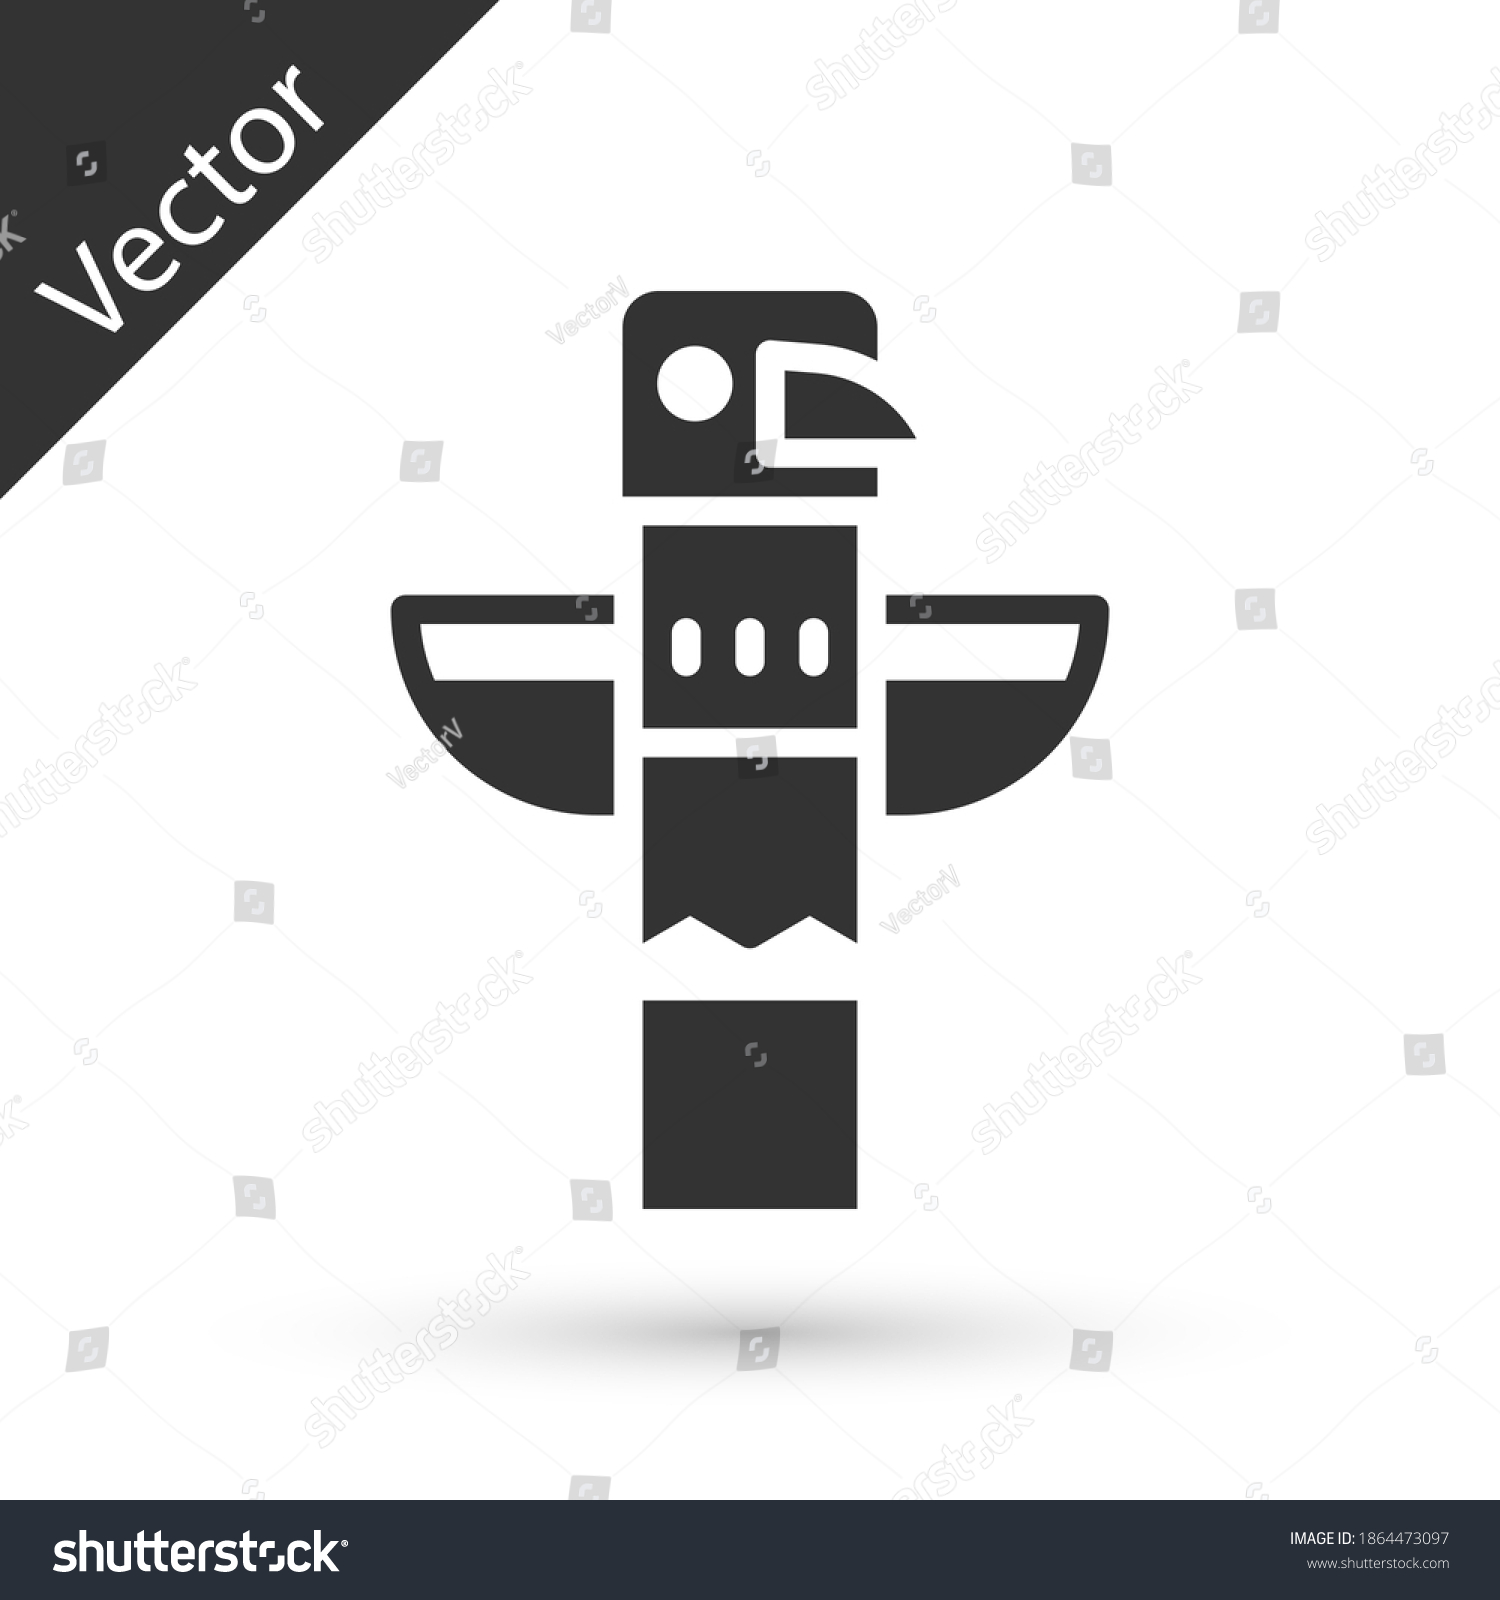 2,315 Canadian totem Images, Stock Photos & Vectors | Shutterstock